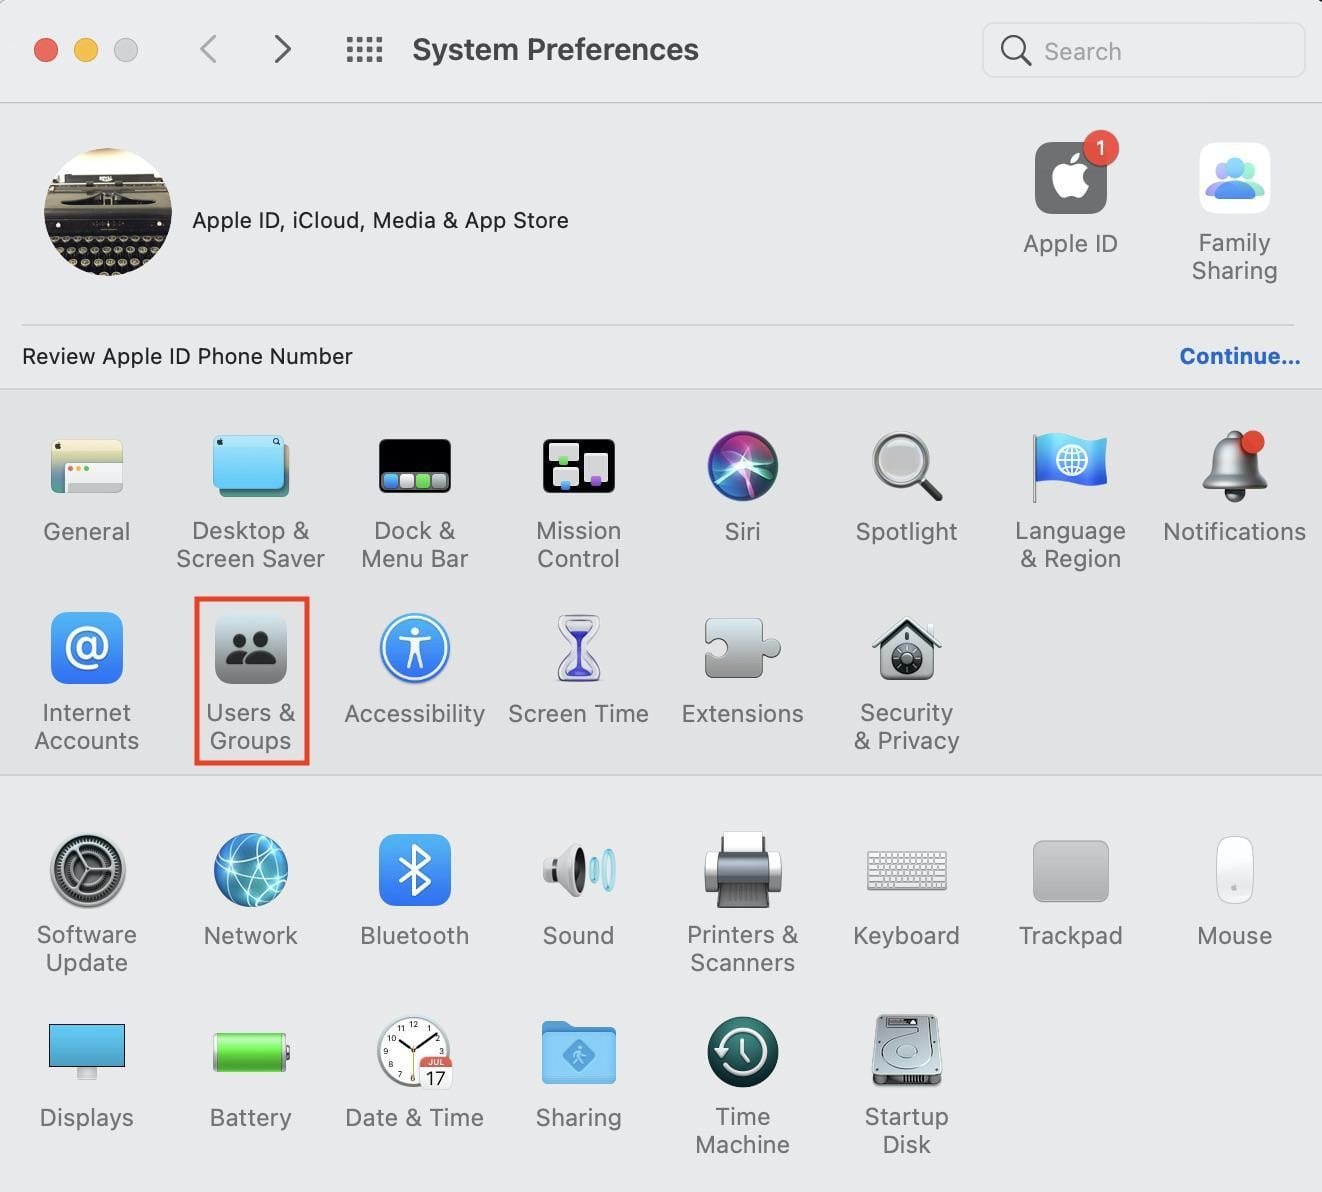 Users & Groups in system preferences on Mac